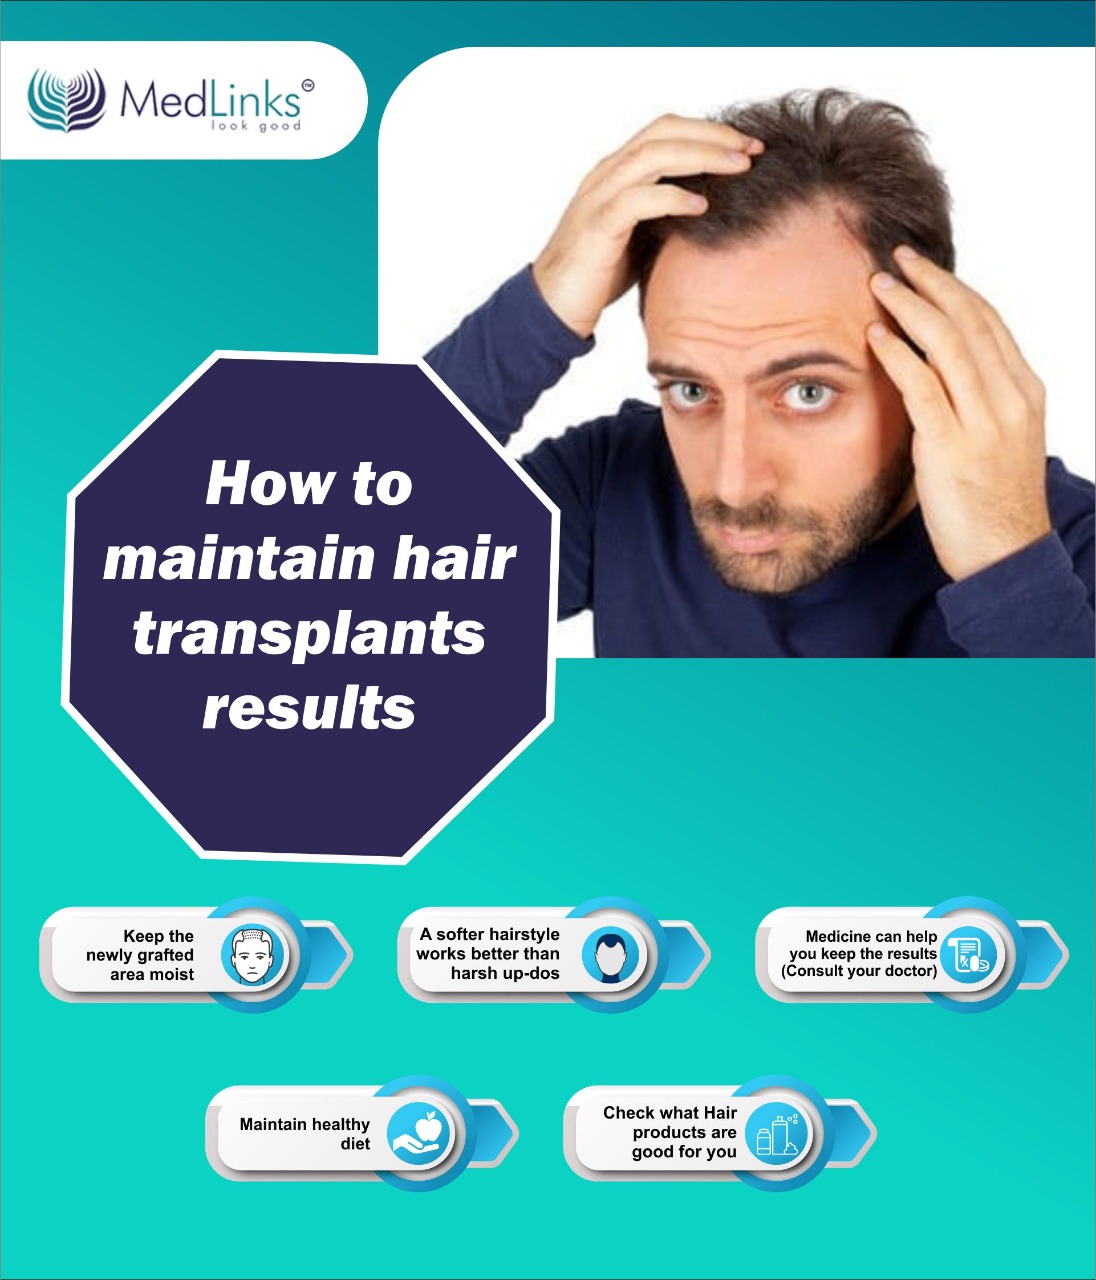 Get a Hair Transplant During the Winter Season